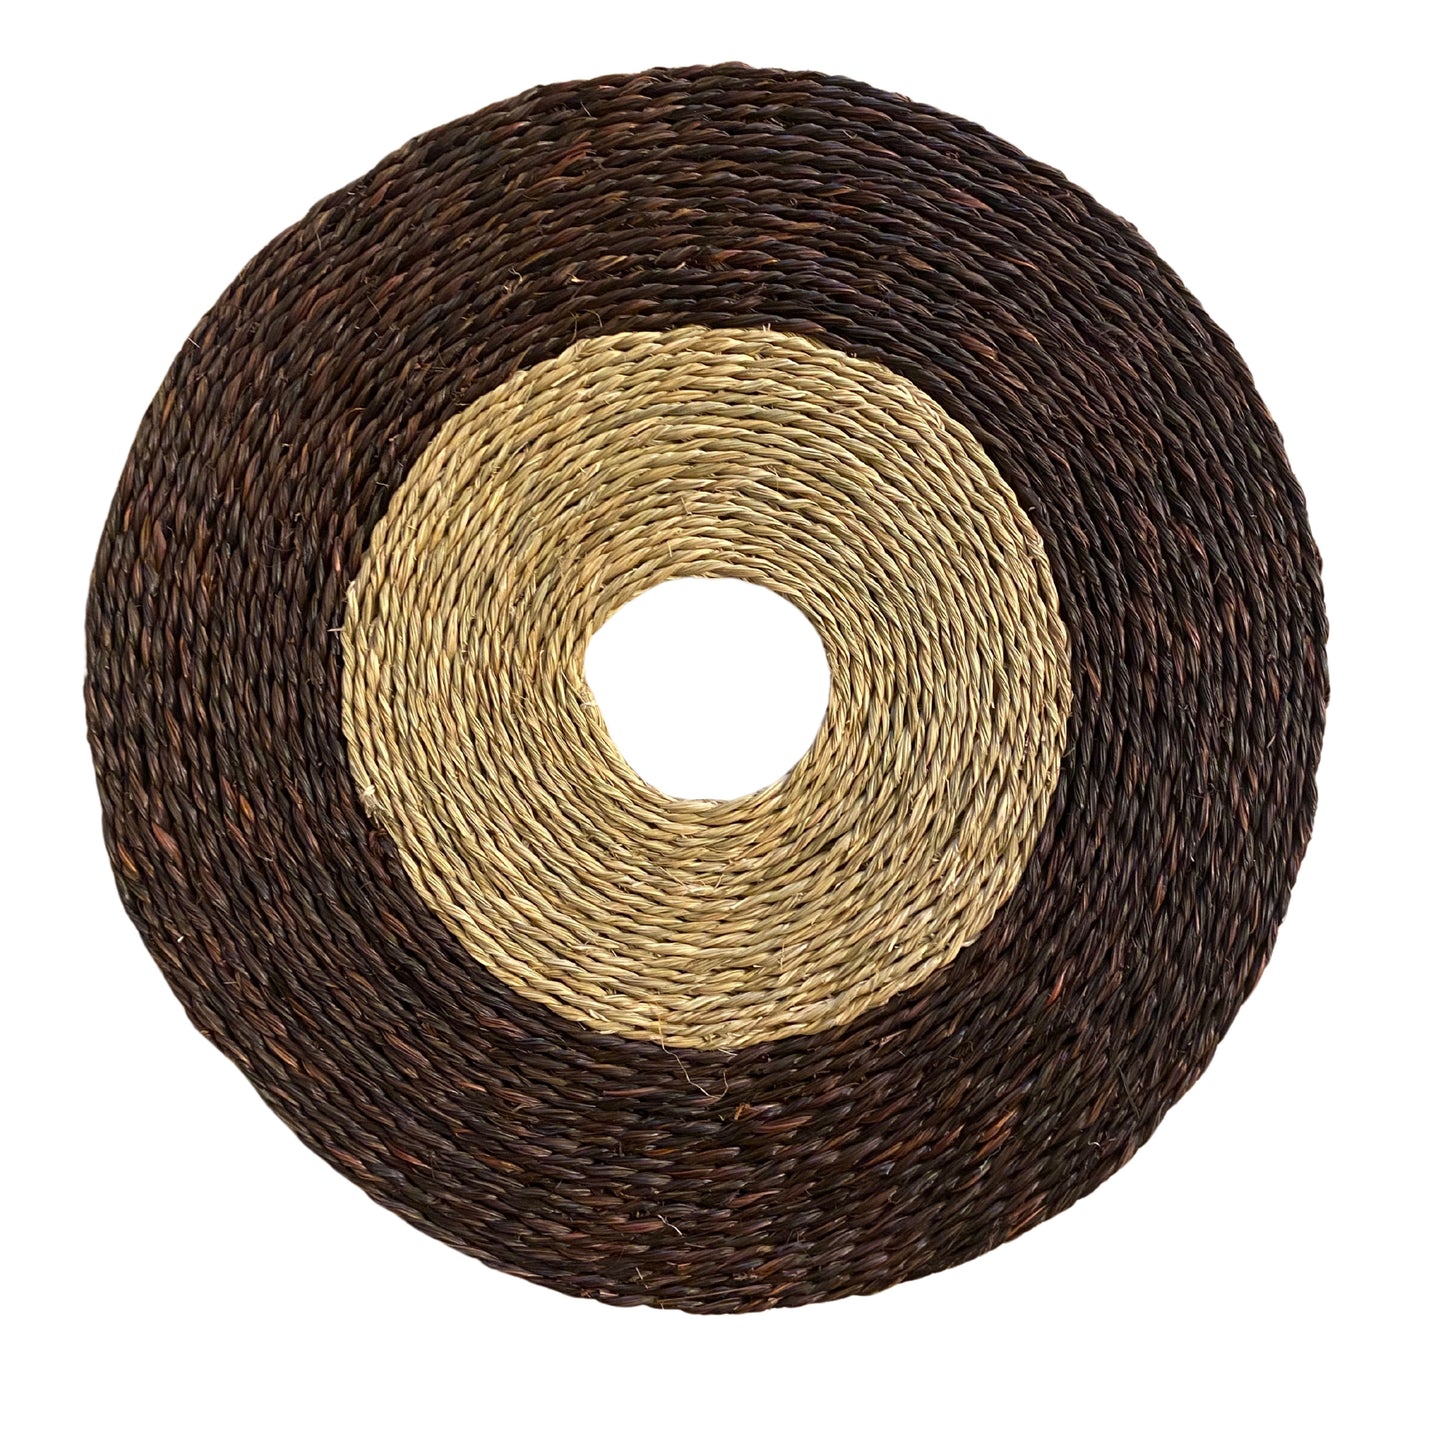 Chocolate Brown Wheel Grass Placemat